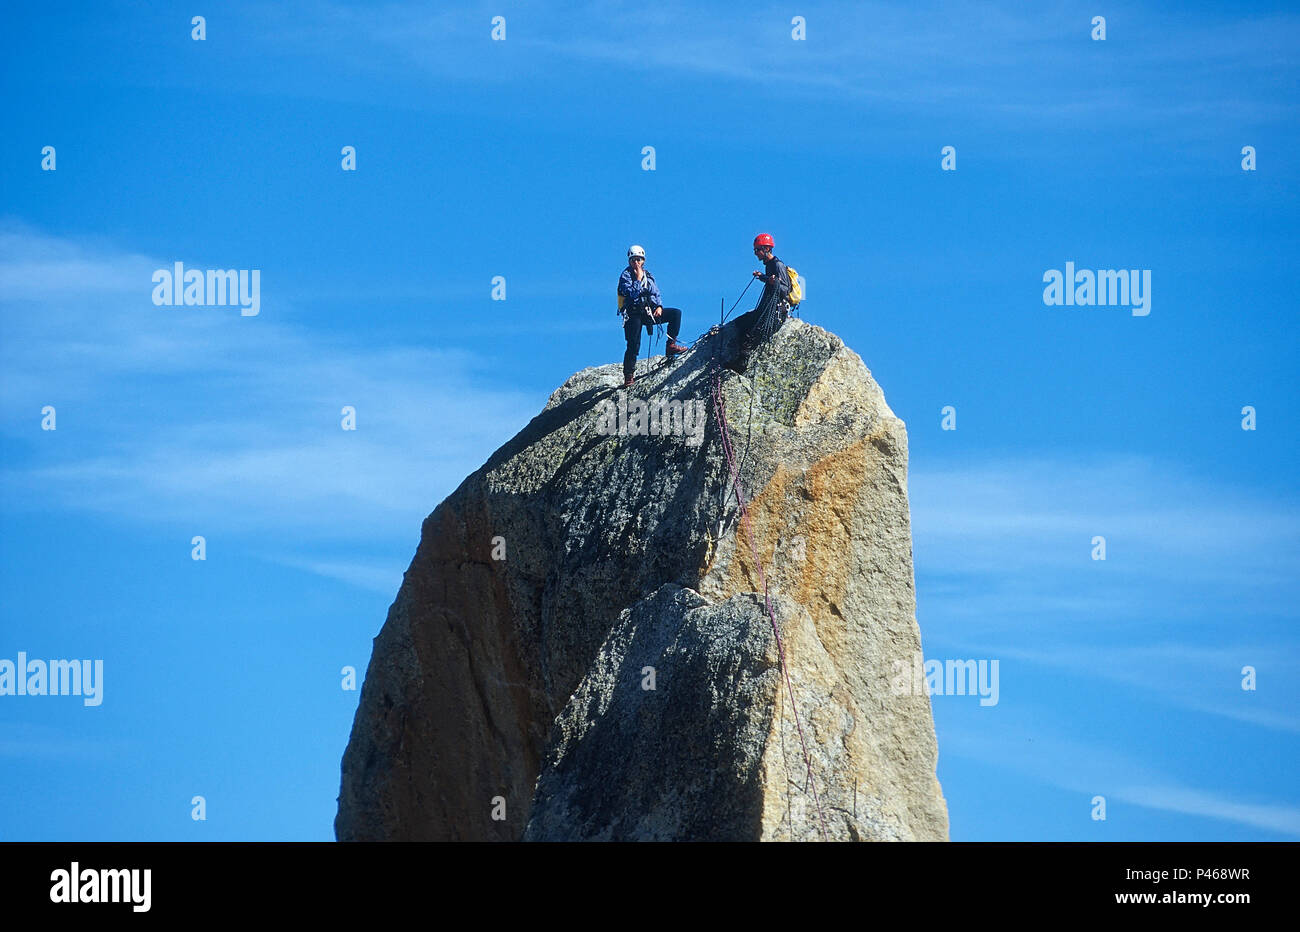 Rock climbers on the summit of the Point Rebuffat on the Aiguille du Midi in the French Alps, Chamonix, France Stock Photo